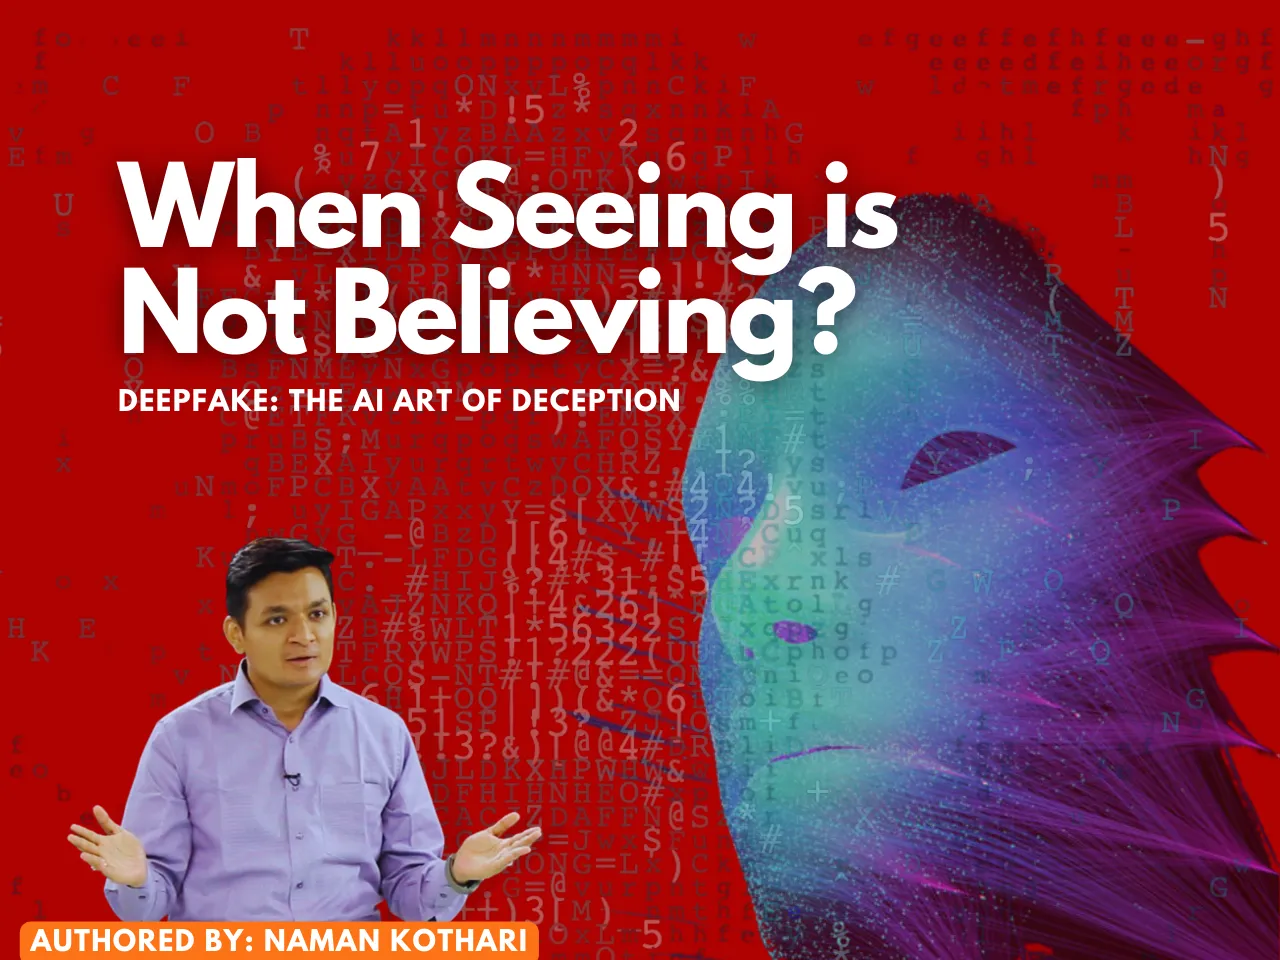 Can You Trust Your Eyes? Deepfakes & the Future of Seeing is Believing